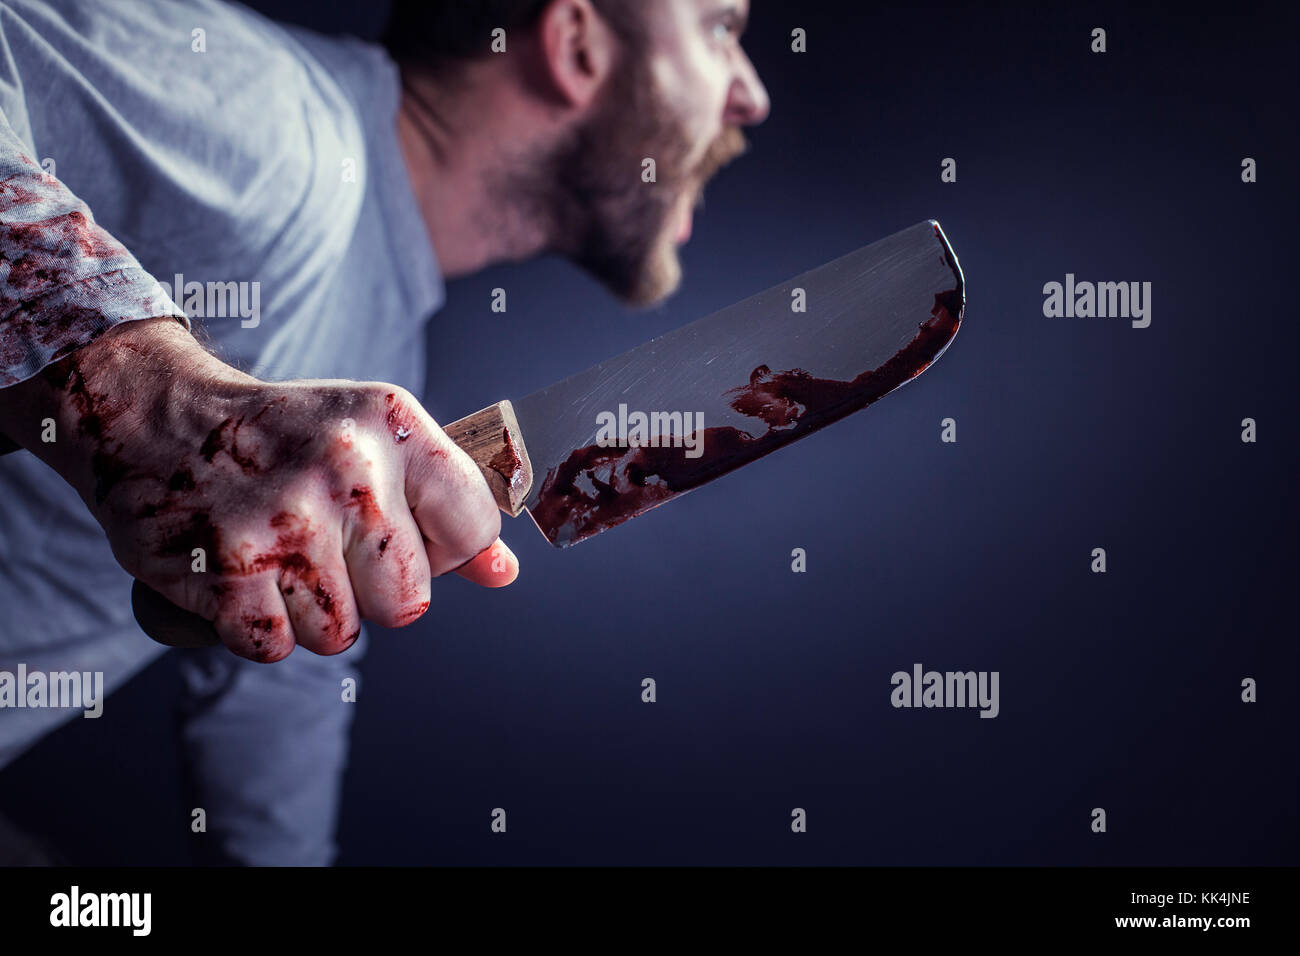 detail of man holding bloody knife crime concept Stock Photo